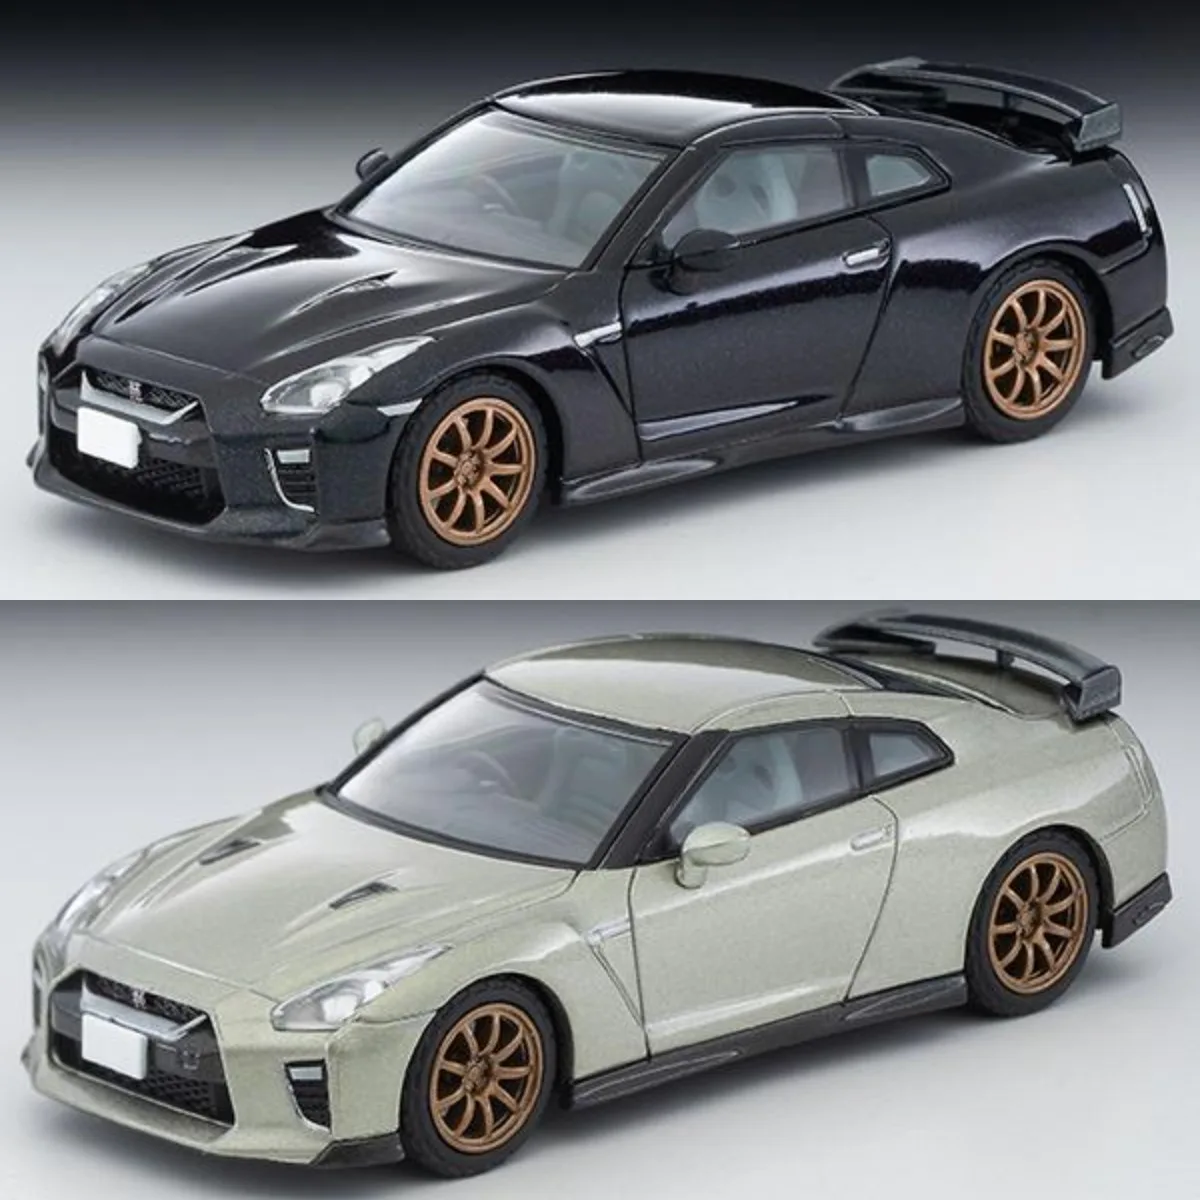 

Tomytec Tomica TLV N266A/B GTR R35 T-spec JDM Limited Edition Simulation Alloy Static Car Model Toy Gift